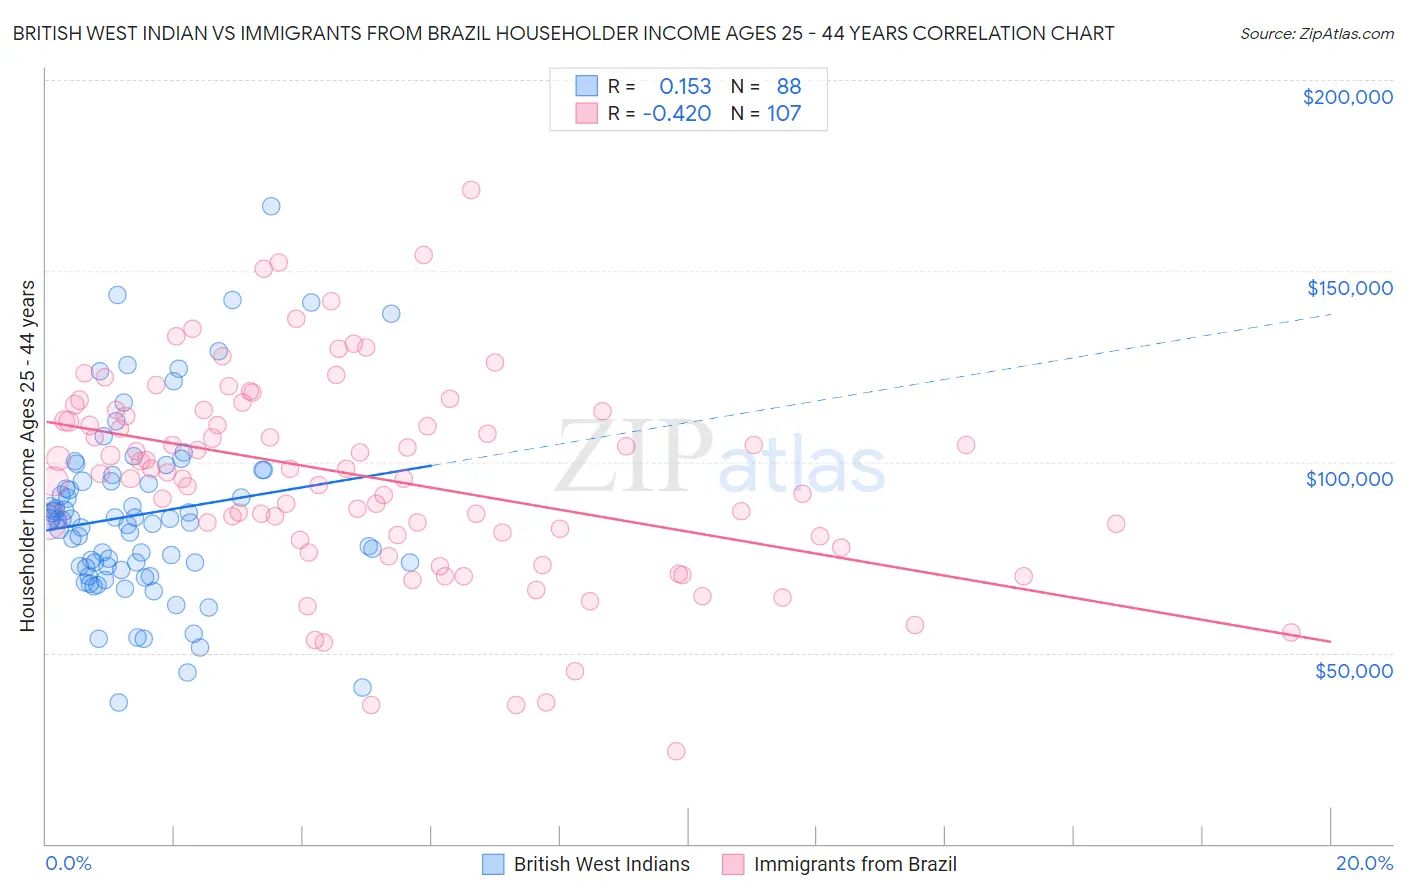 British West Indian vs Immigrants from Brazil Householder Income Ages 25 - 44 years